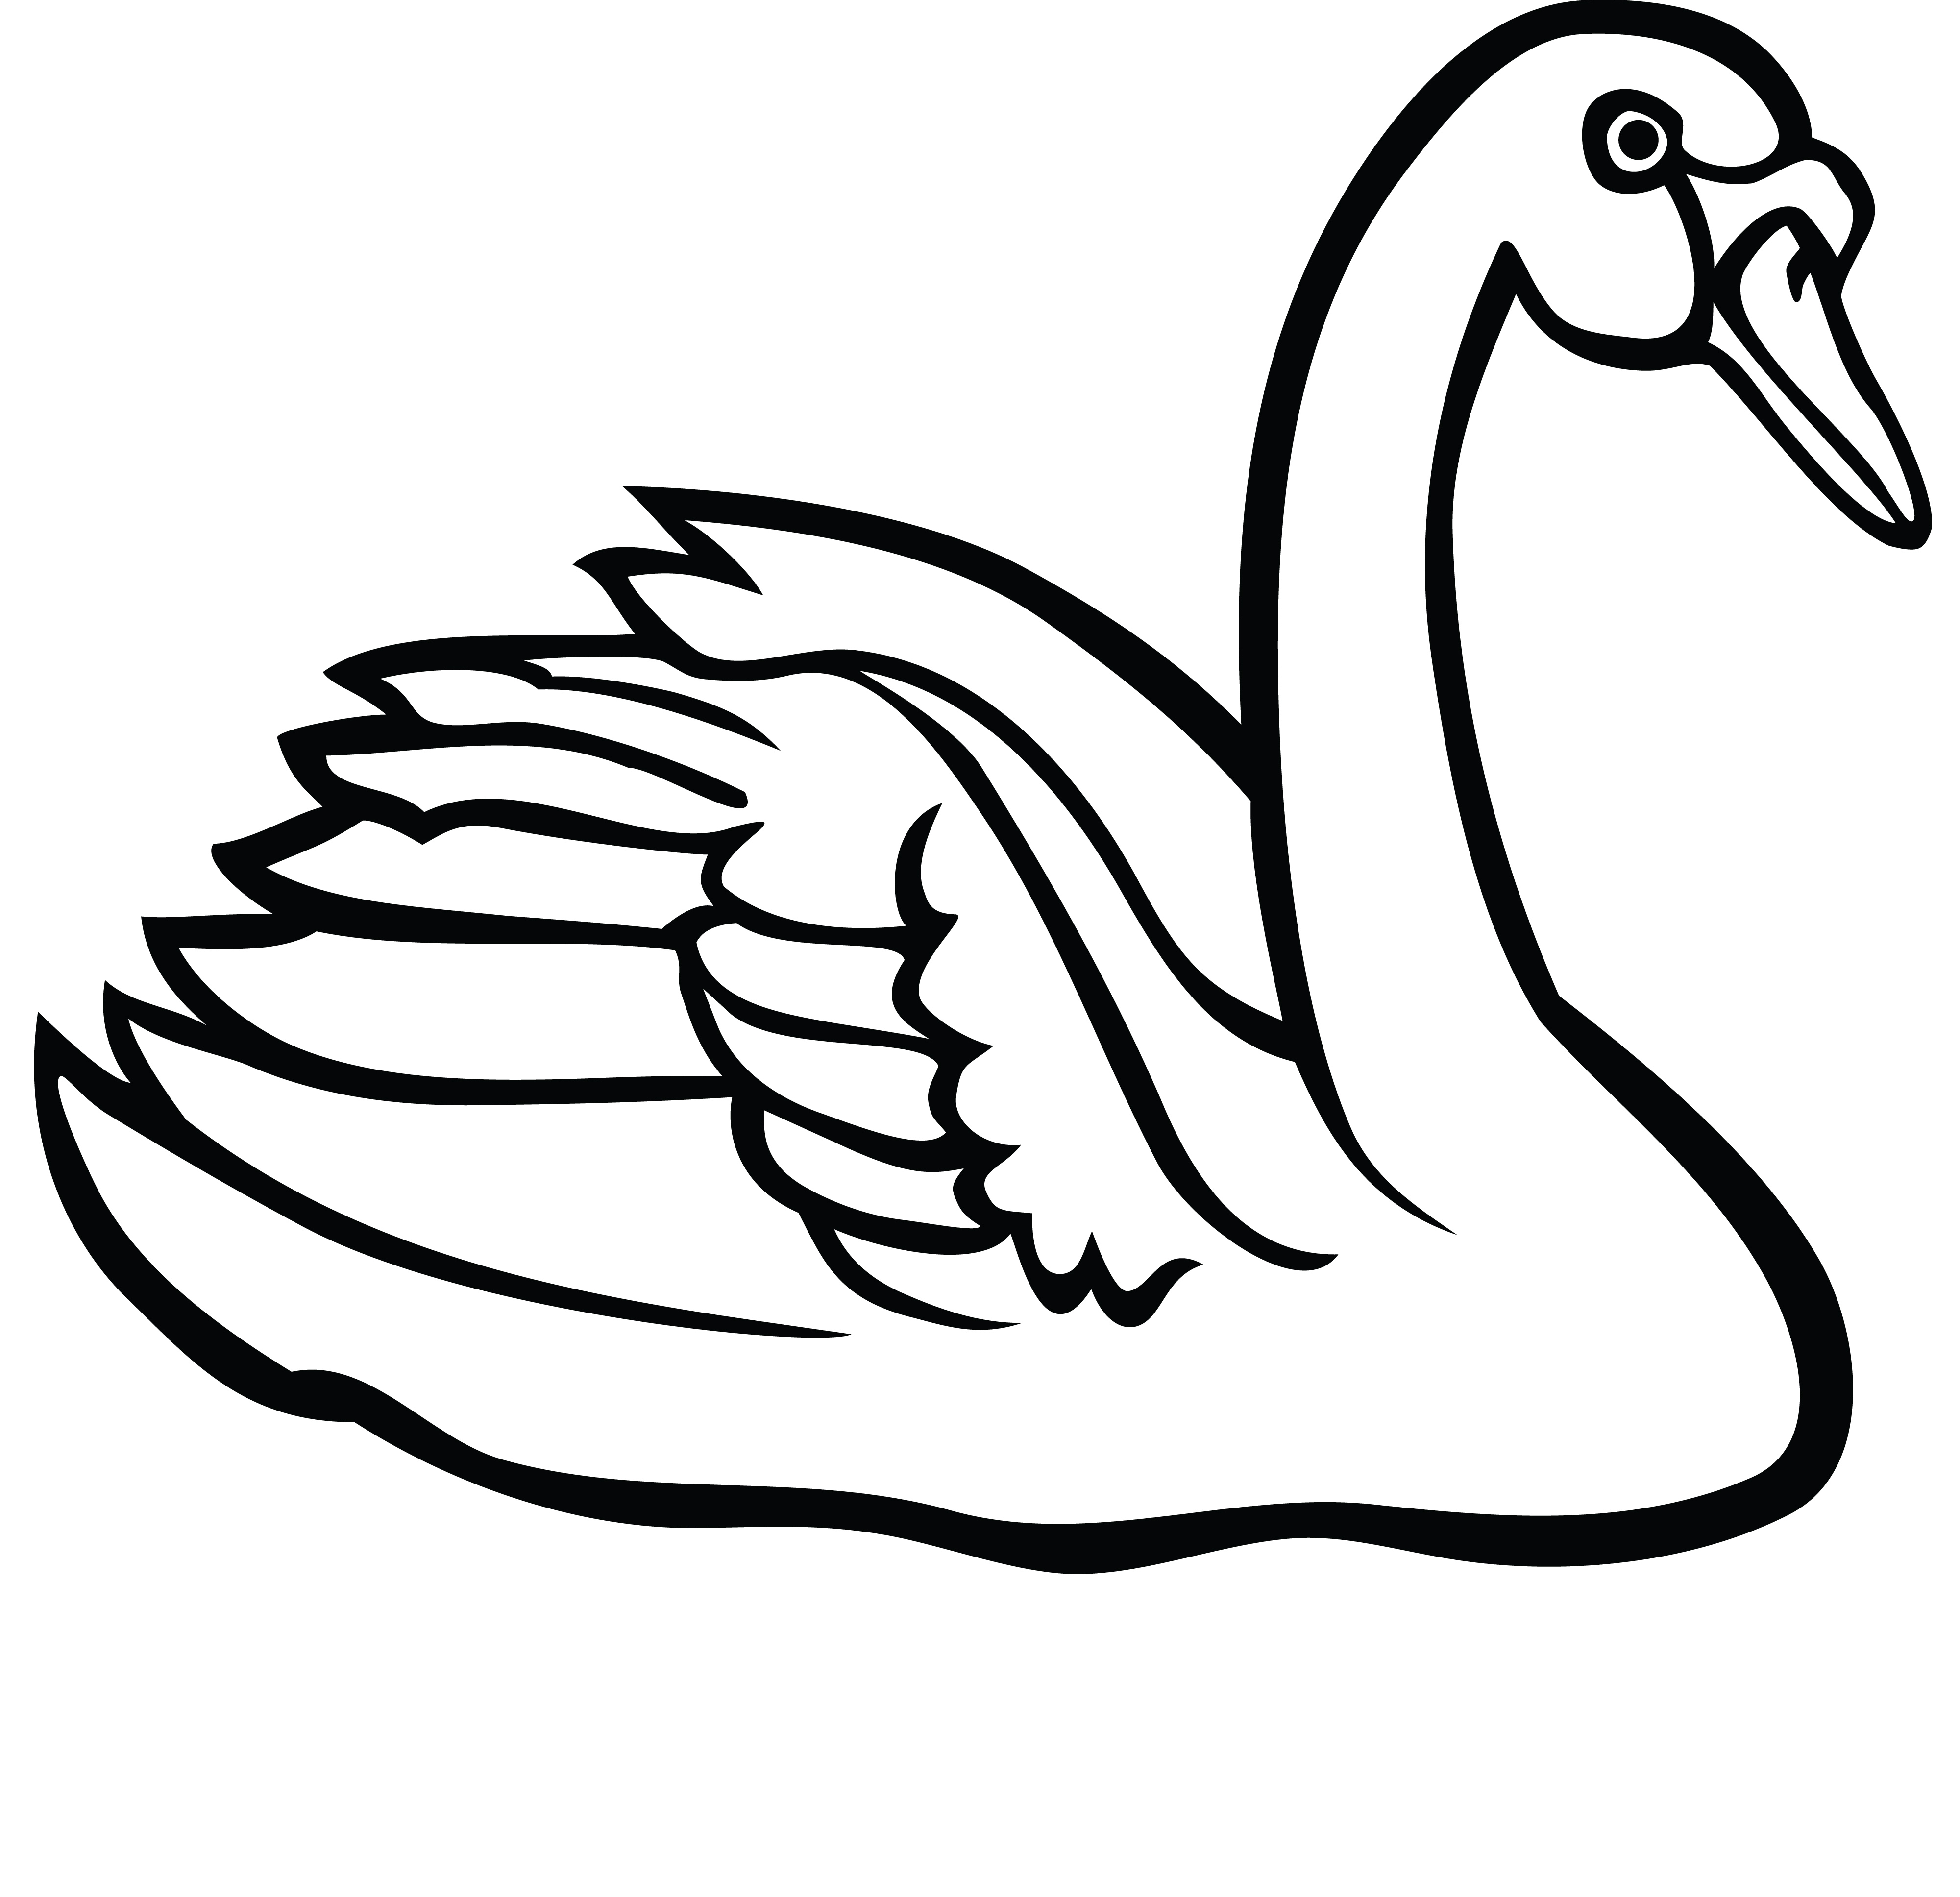 Free Clipart Of A swan.